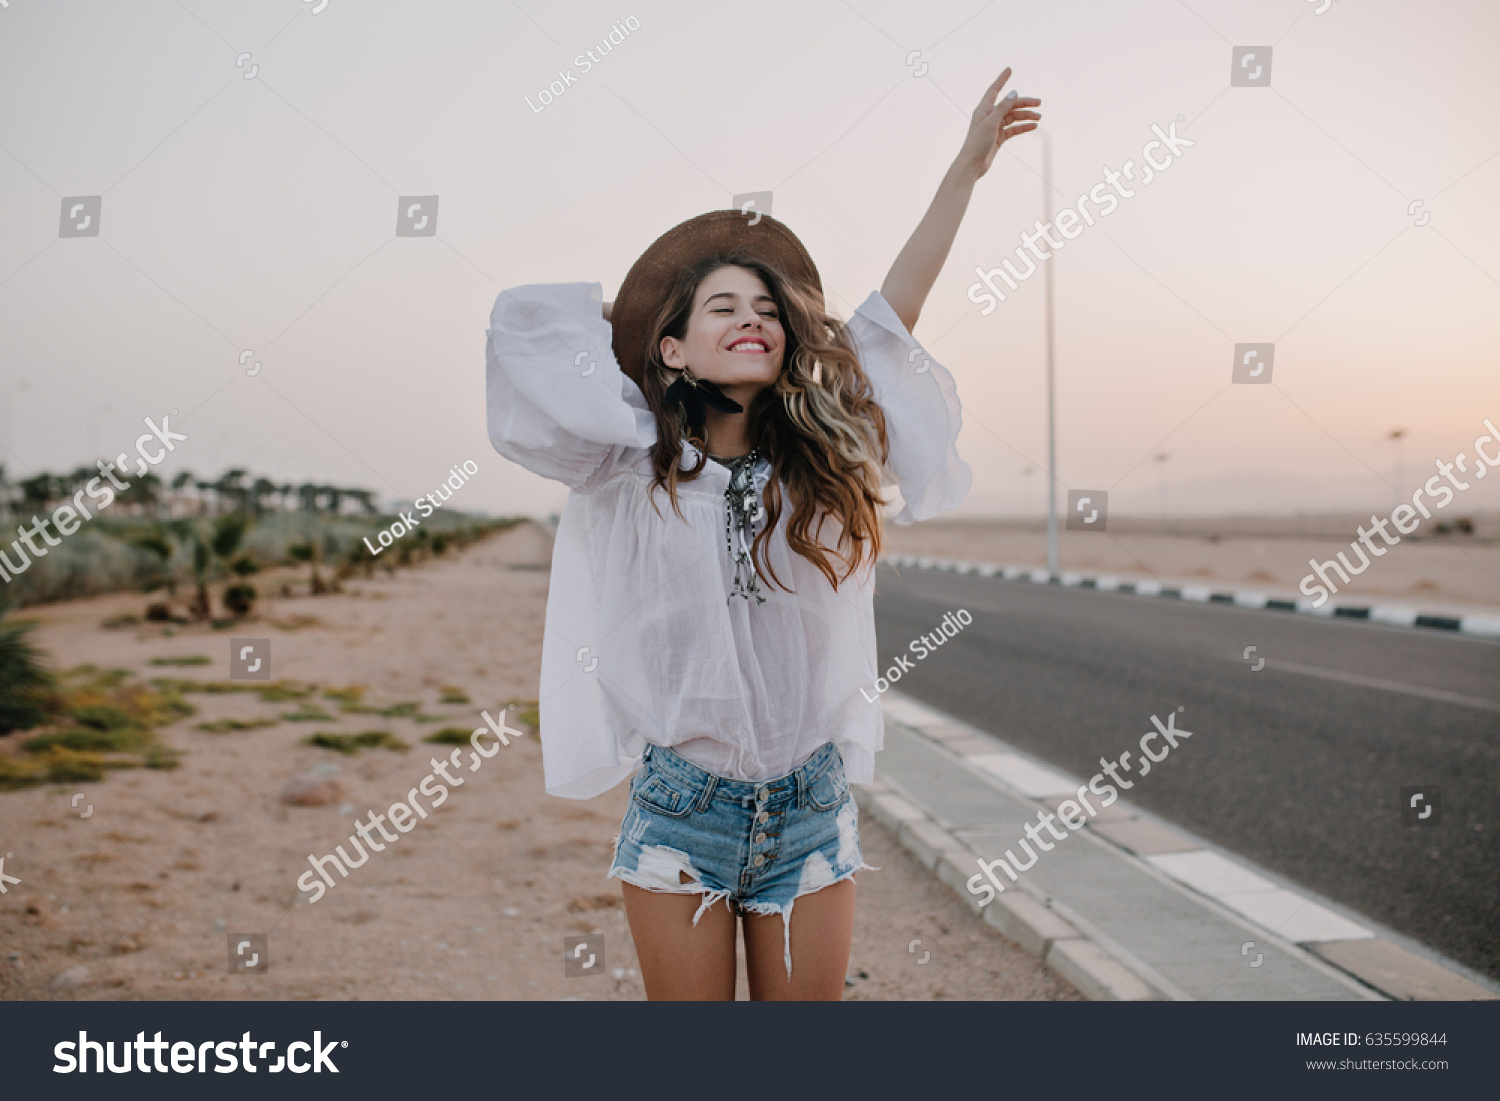 Smiling cheerful long-haired girl with curly hair breathes a full breast and enjoys freedom, standing next to road. Portrait of adorable young woman in white blouse and denim shorts having fun outside